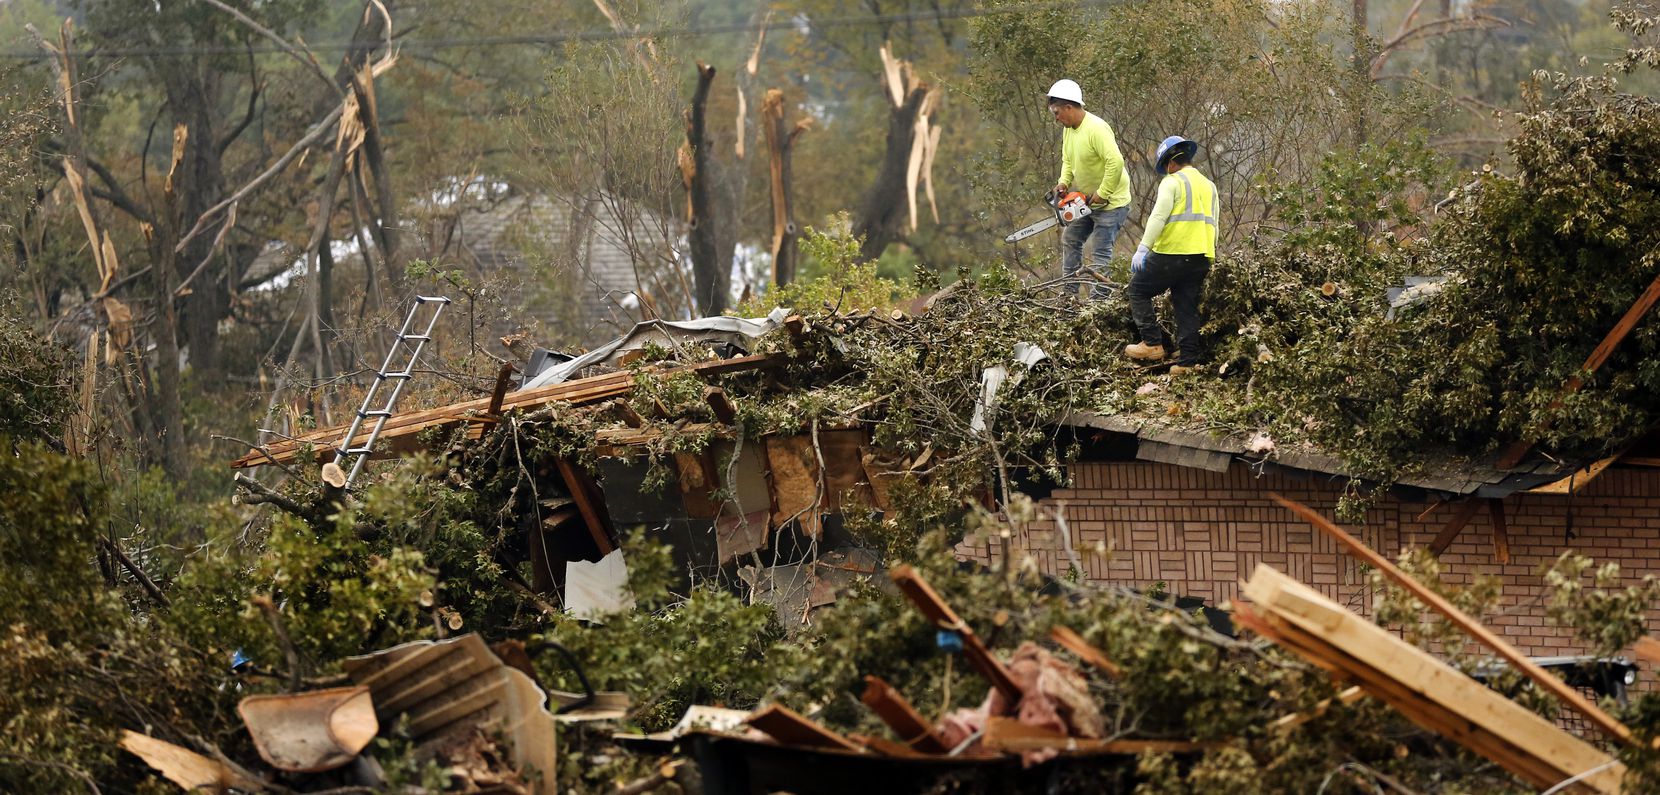 Workers cut up and remove a tree that toppled onto a home on Royal Lane in northwest Dallas.